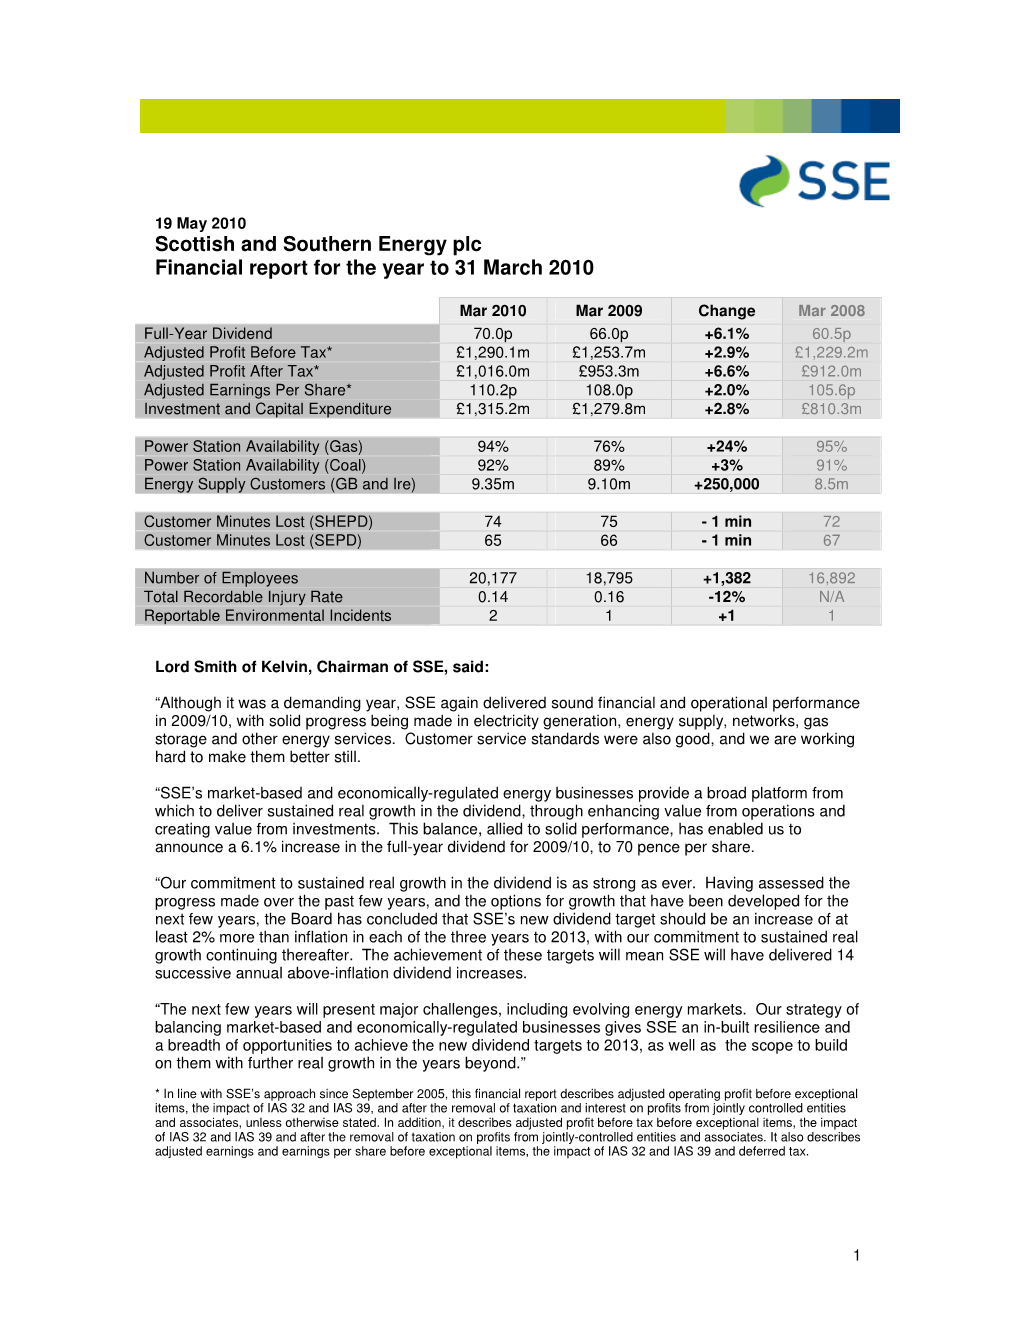 Scottish and Southern Energy Plc Financial Report for the Year to 31 March 2010